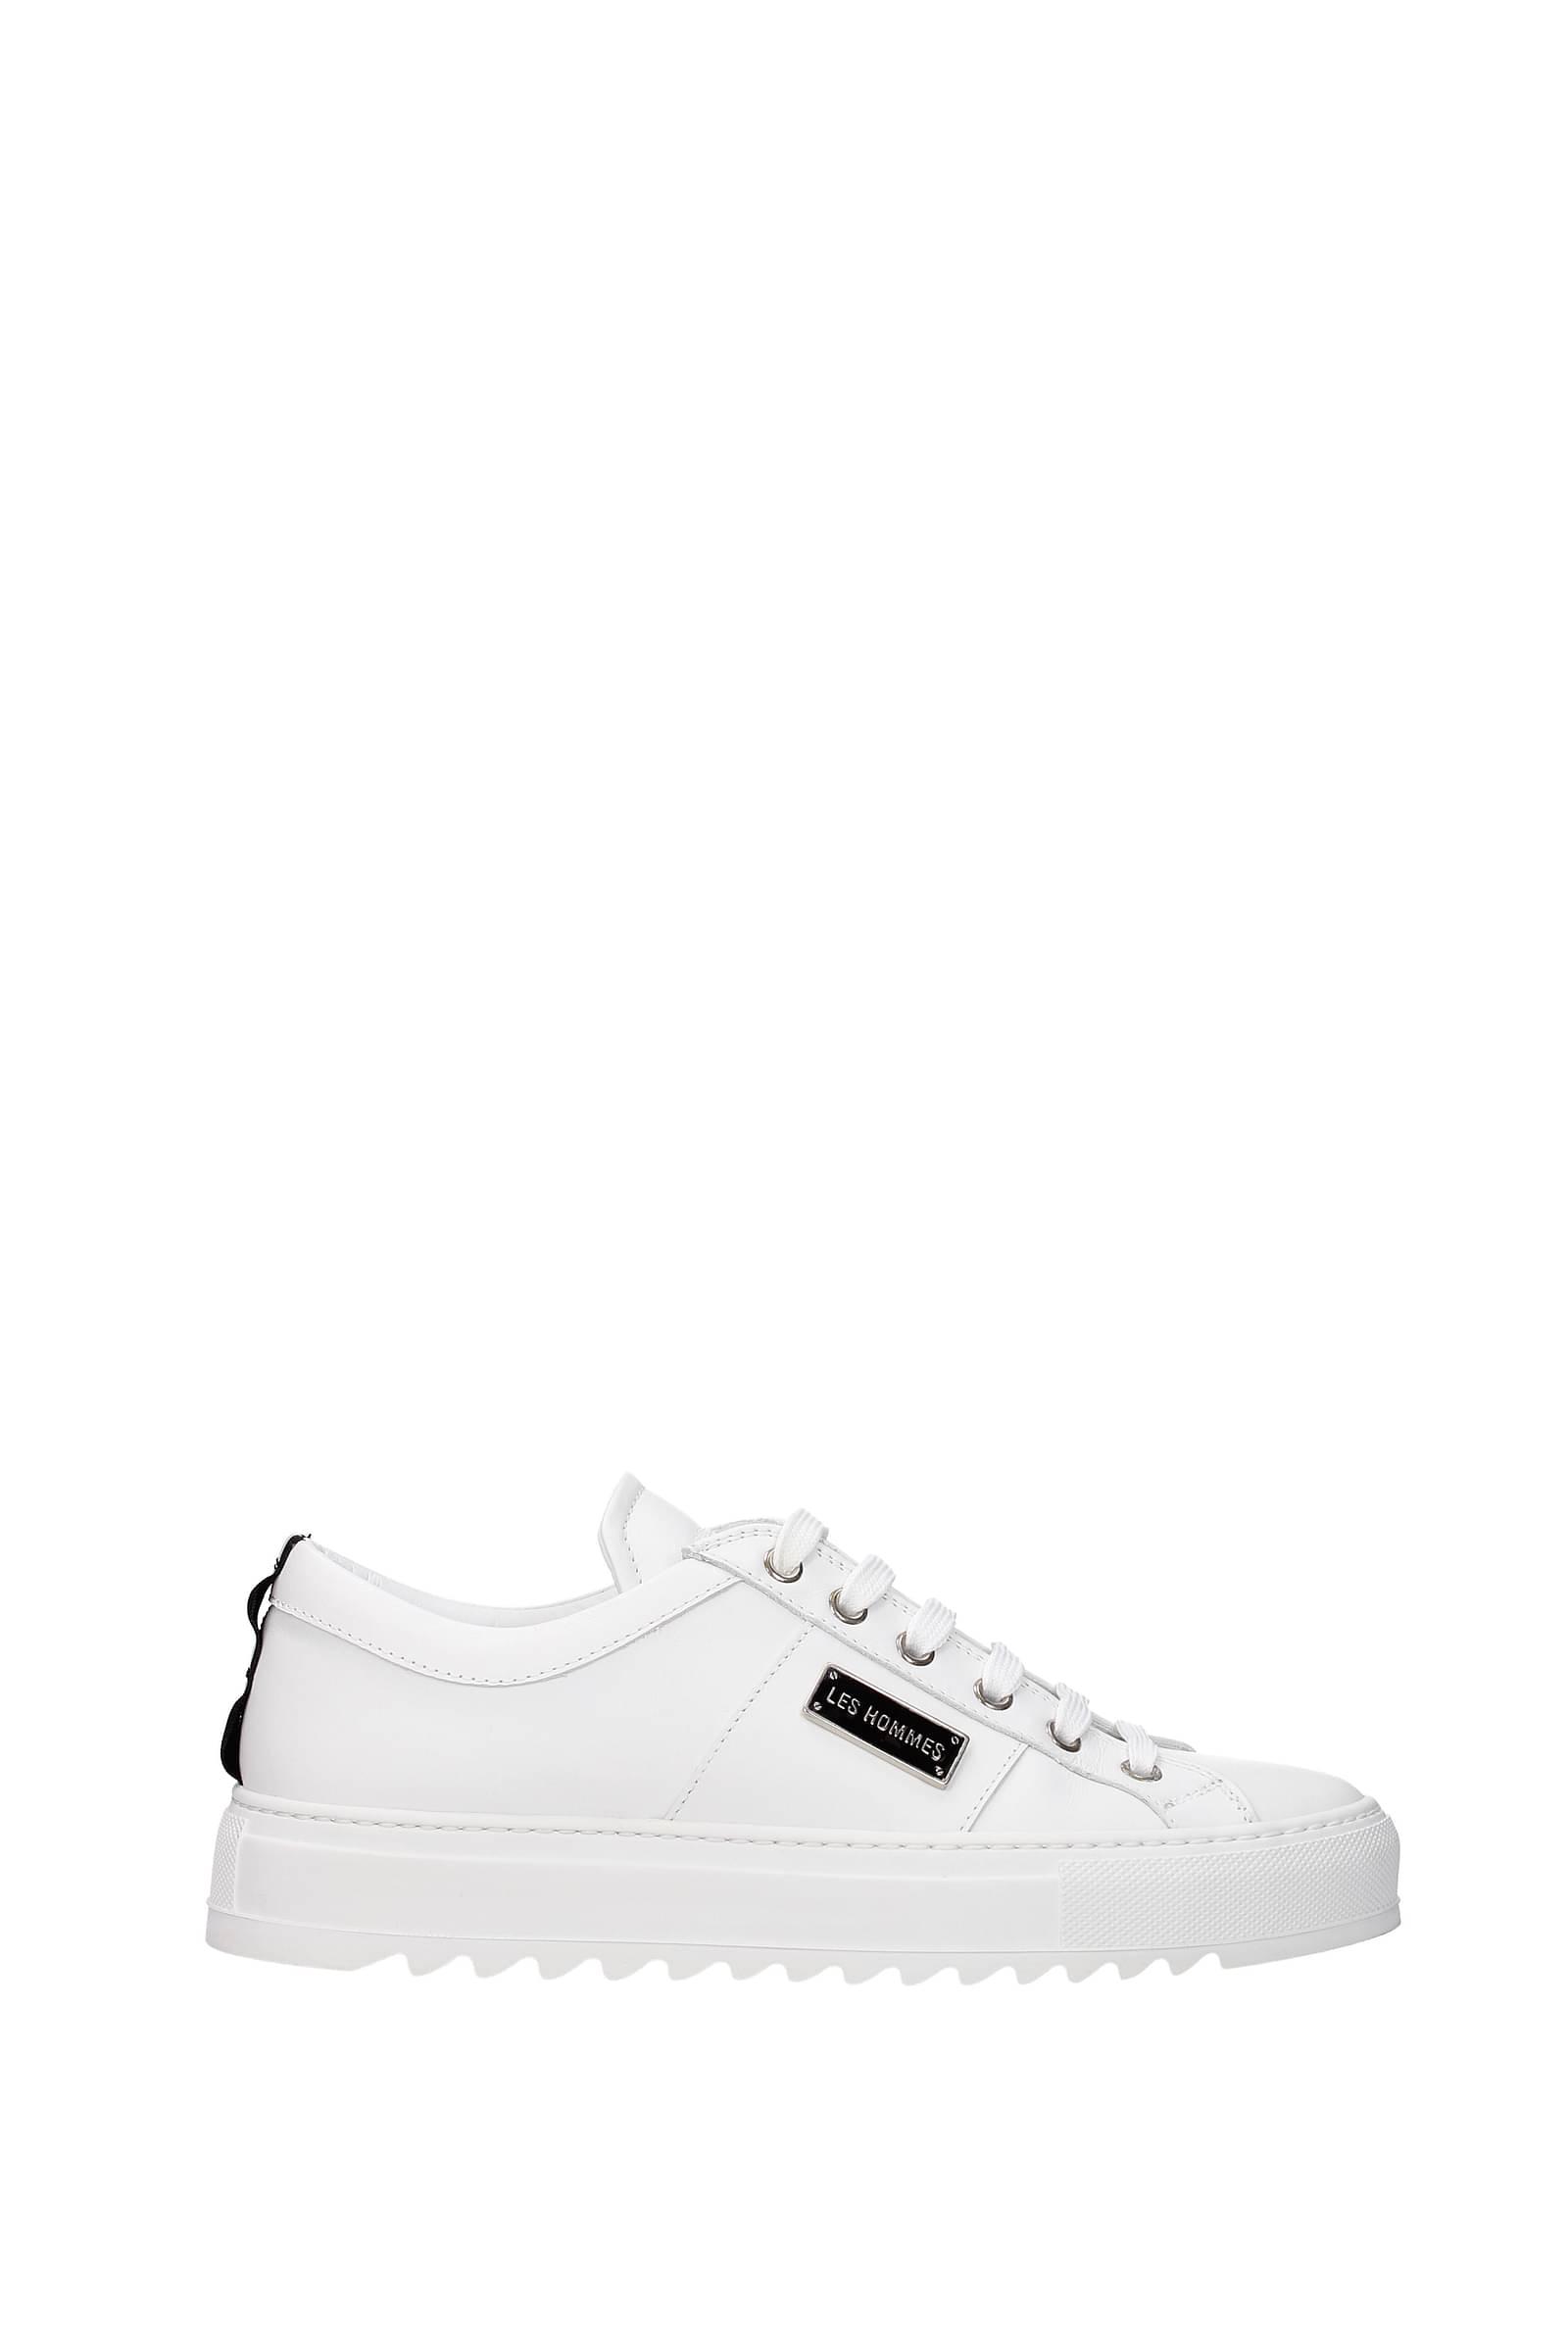 Les Hommes Sneakers Leather White | Lyst